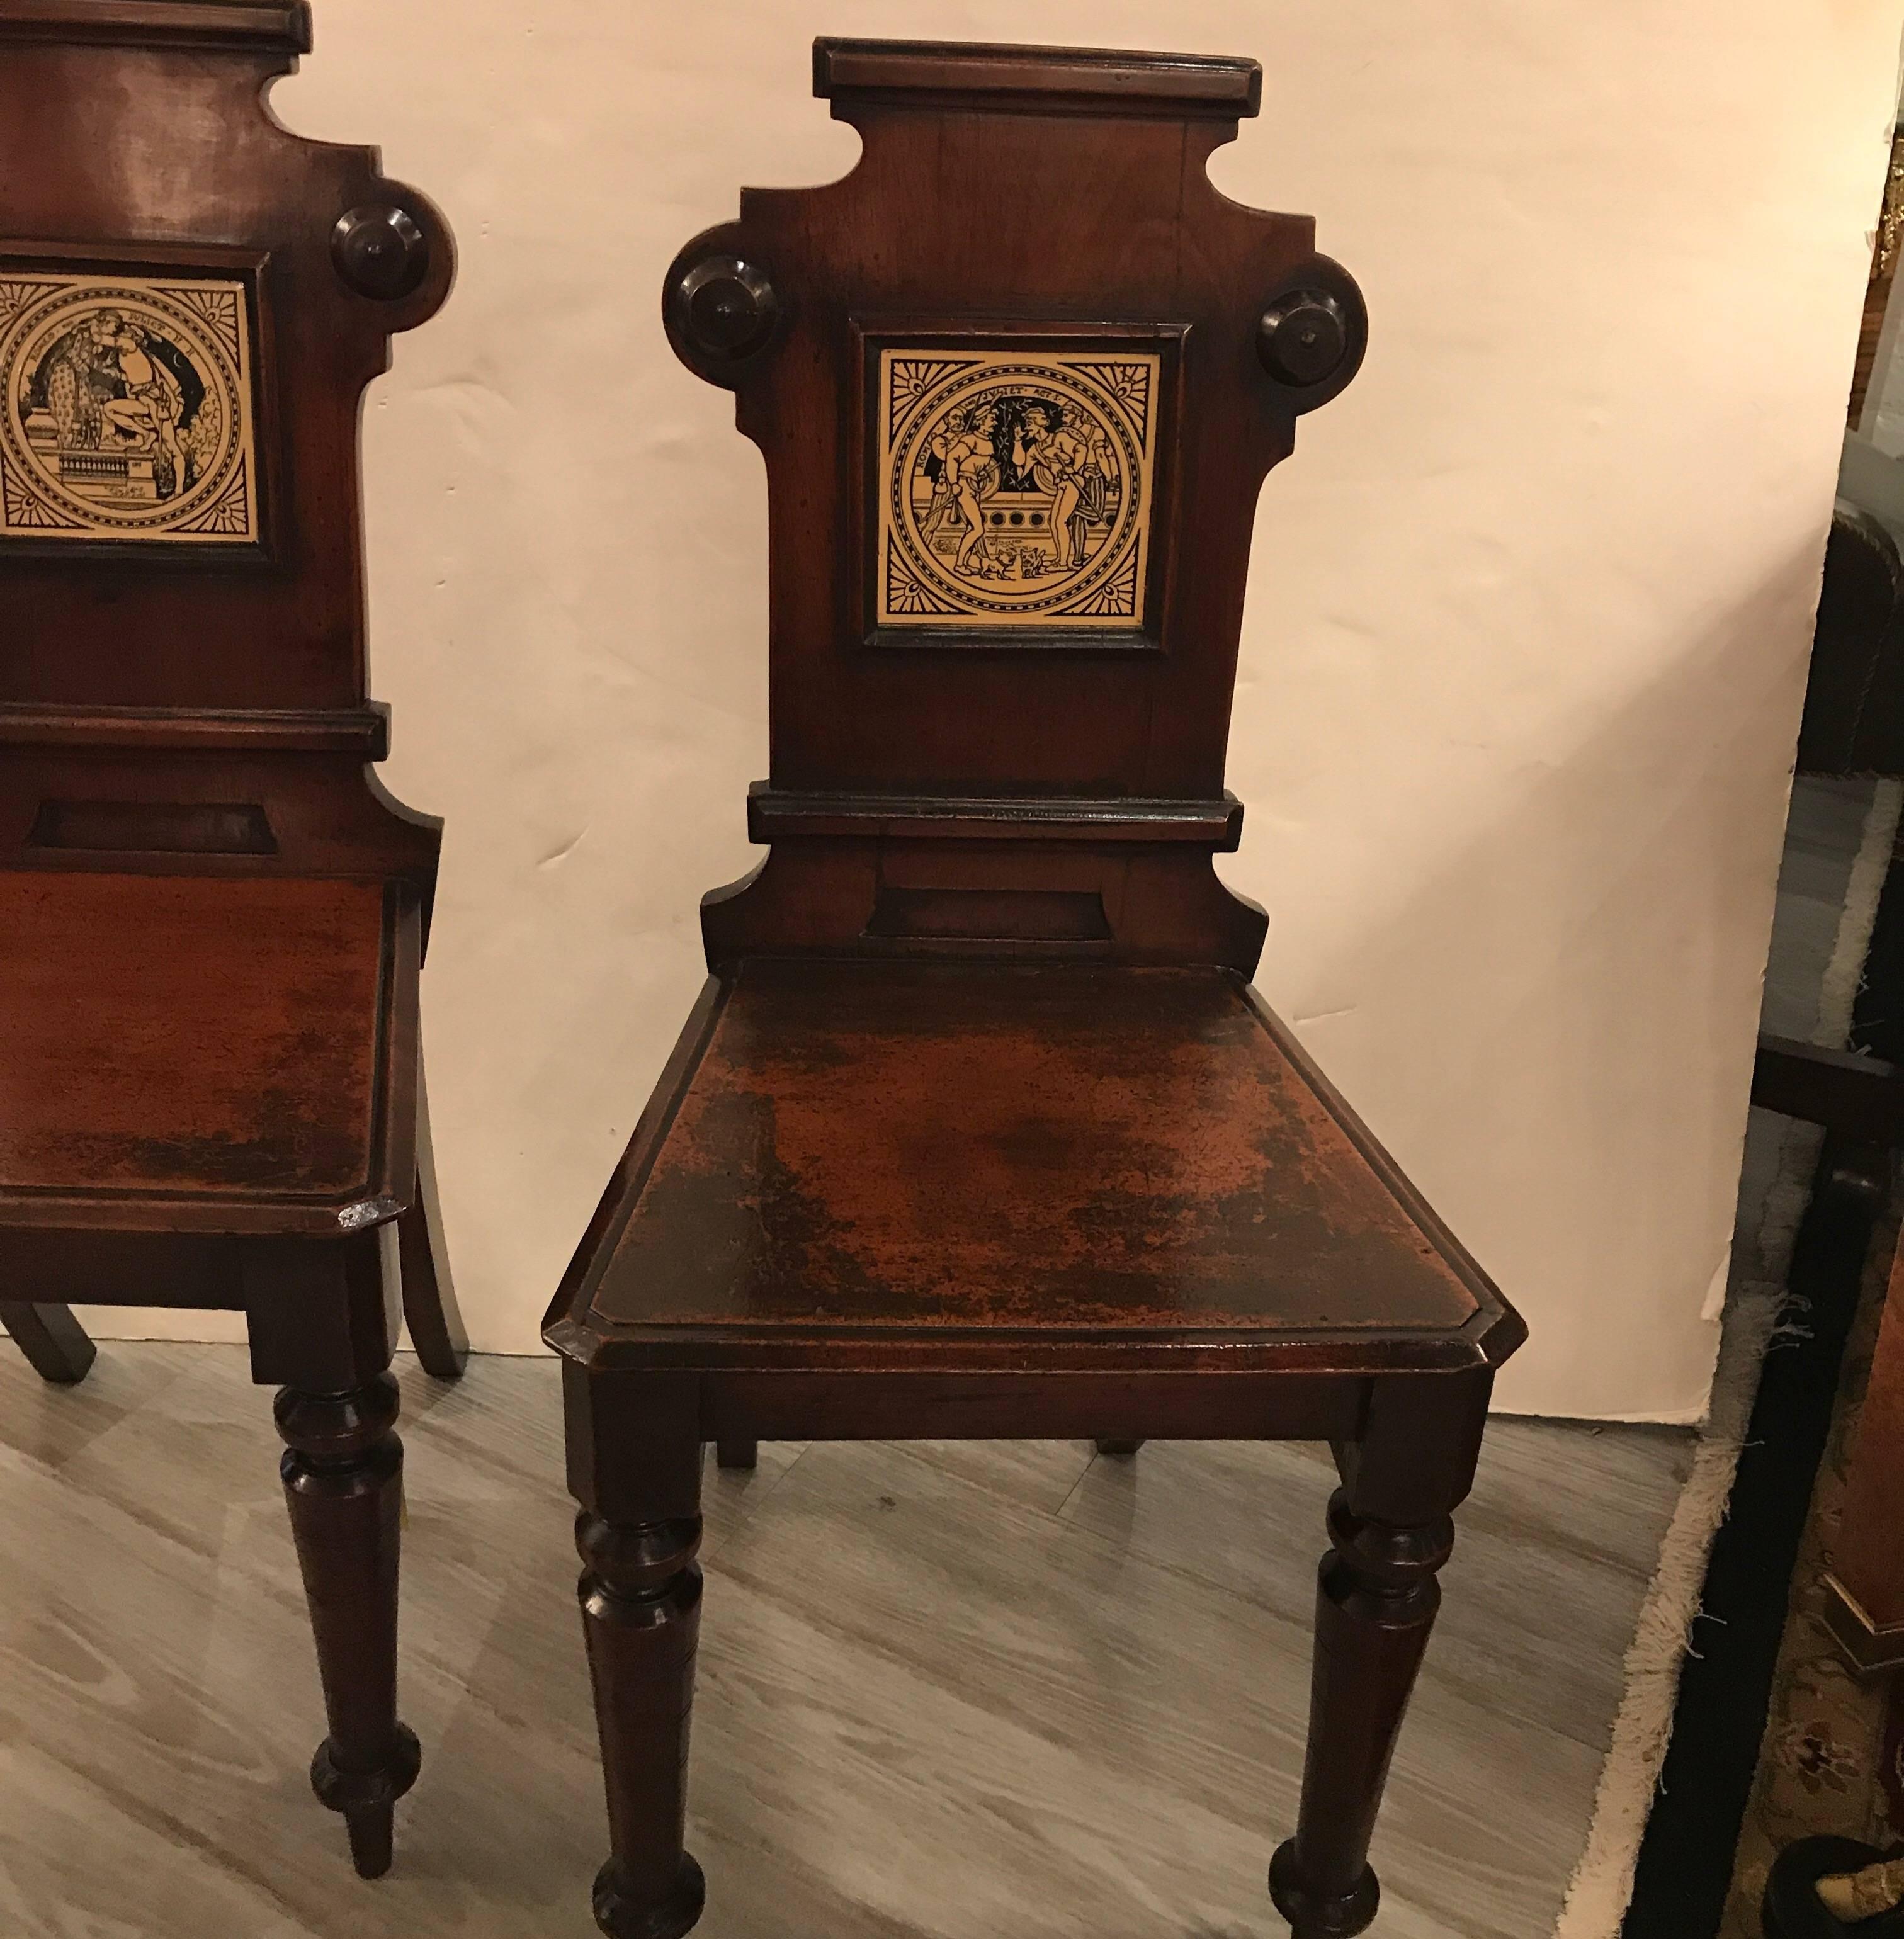 Pair of 19th Century English Hall Chairs with Minton Tiles In Excellent Condition For Sale In Lambertville, NJ